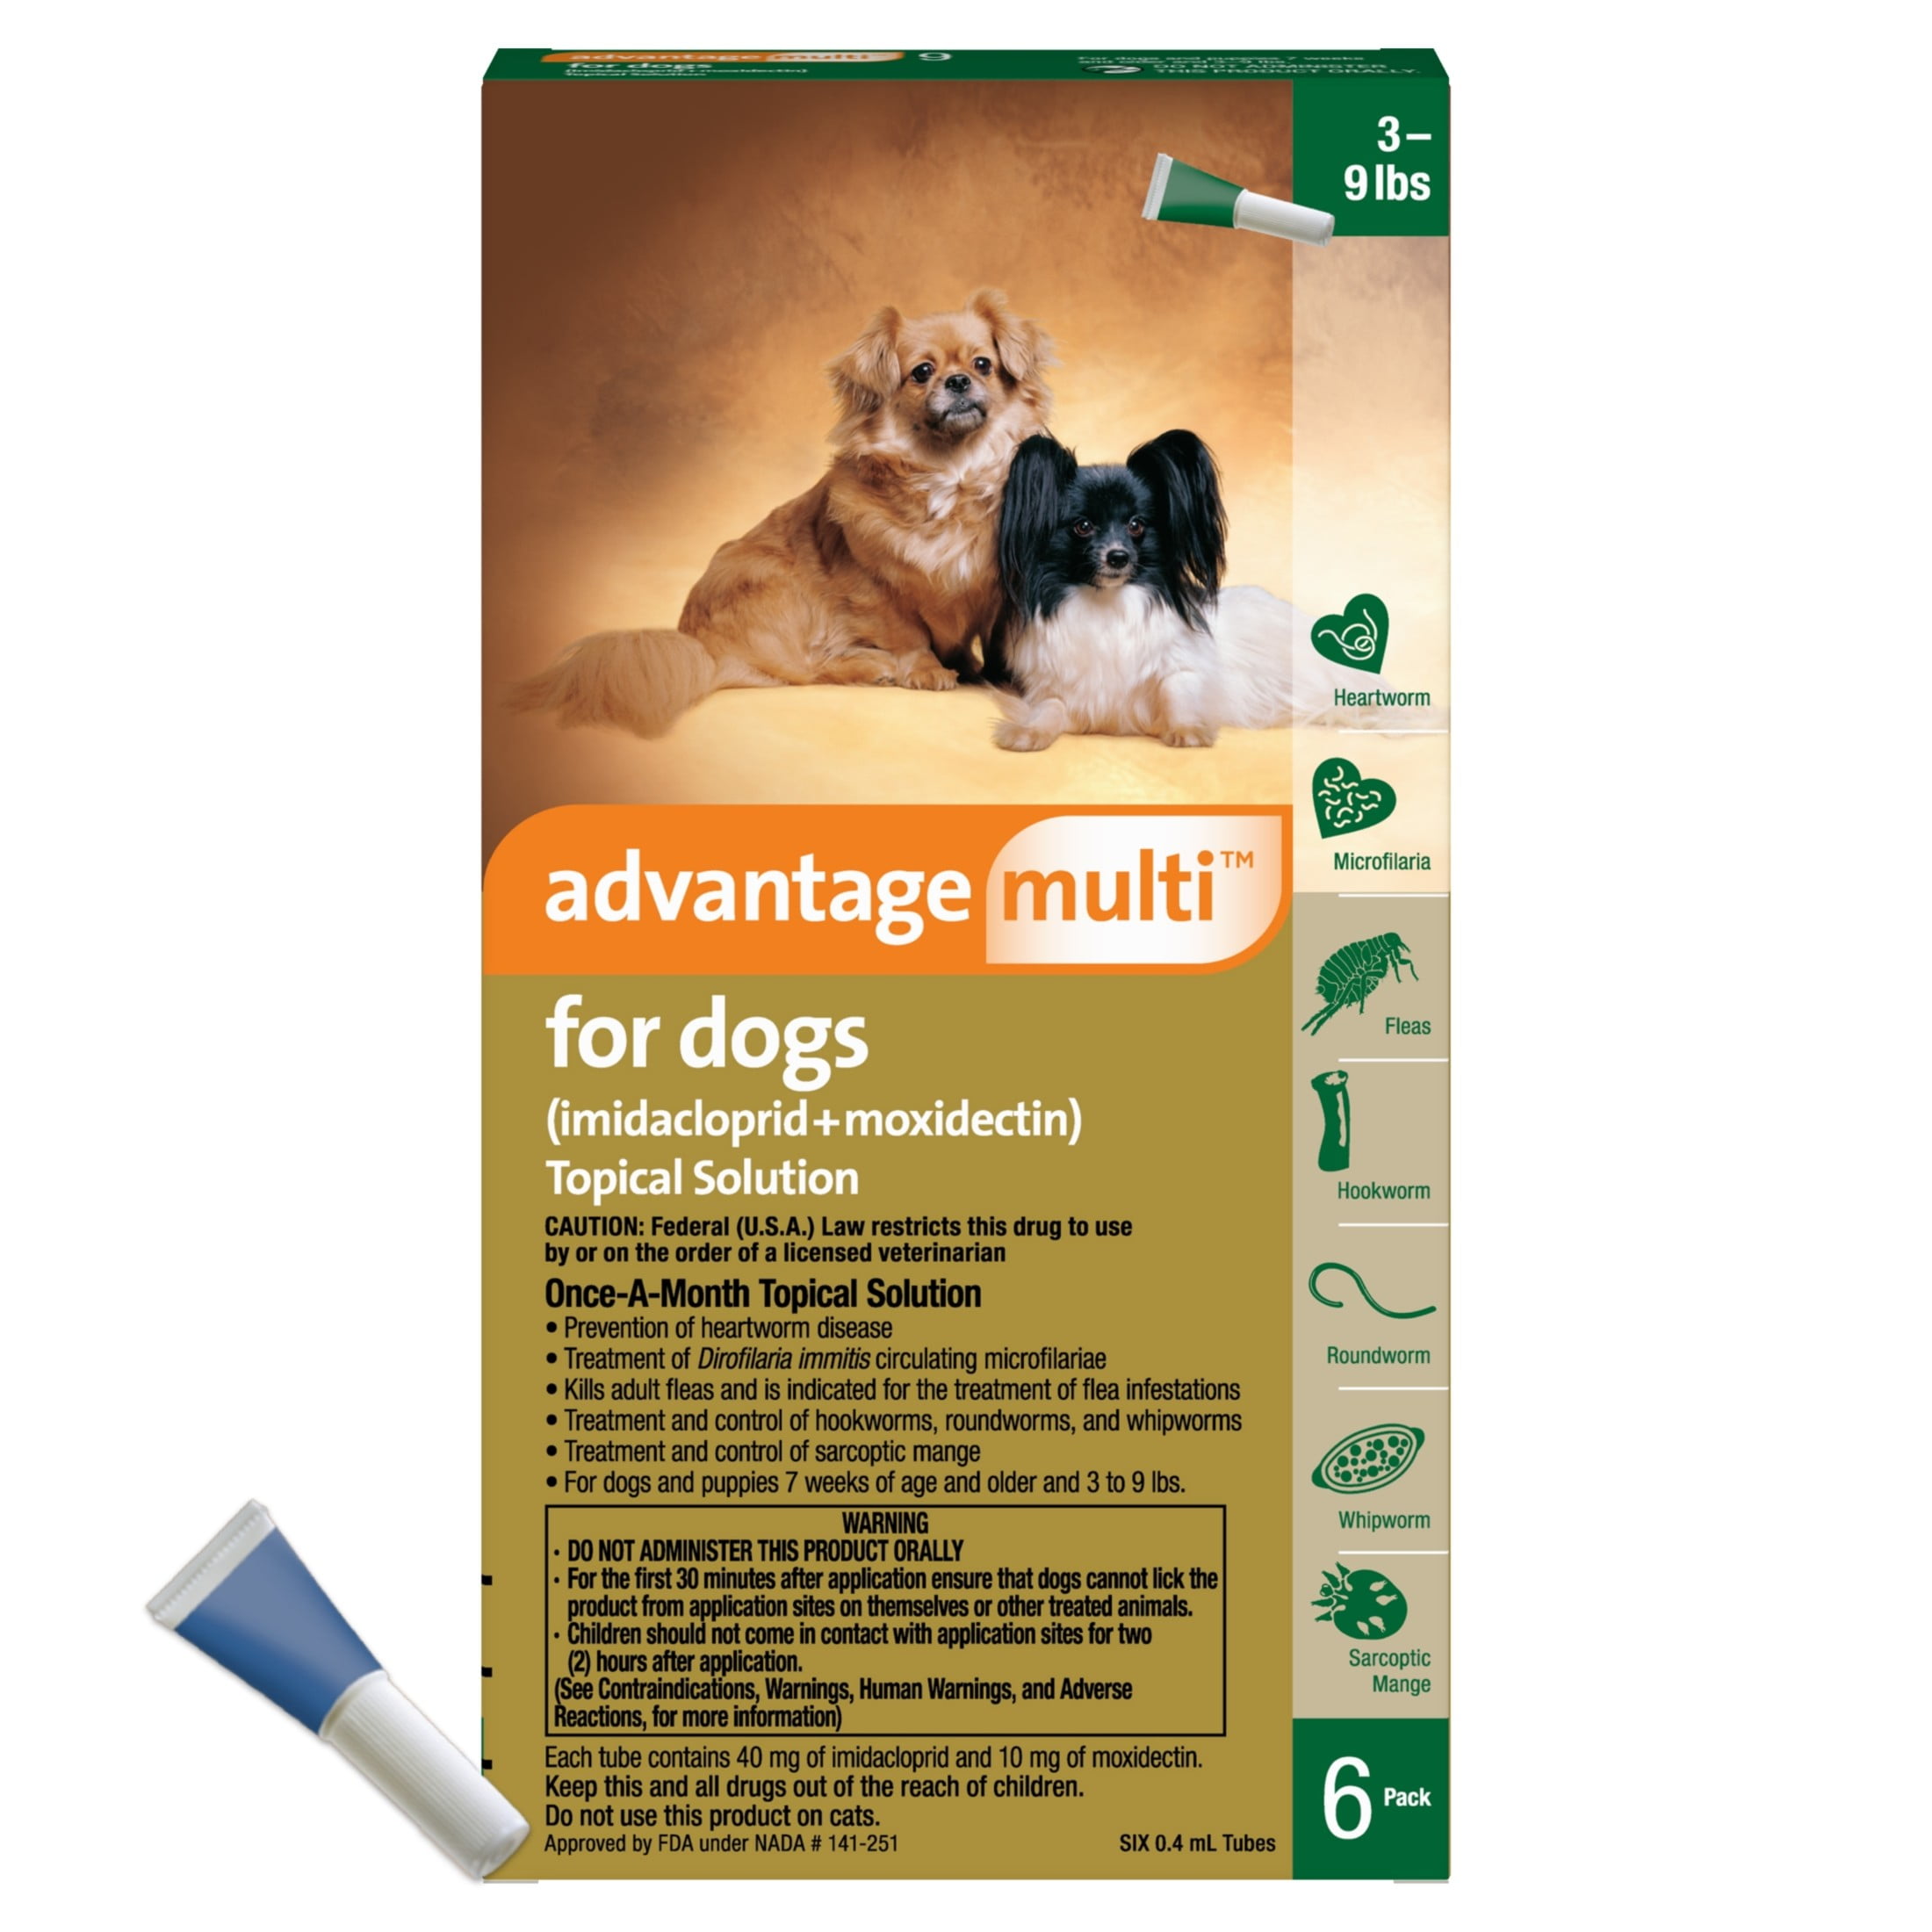 Advantage Multi Topical Solution for Dogs- 3-9 lbs (Green Box) picture image